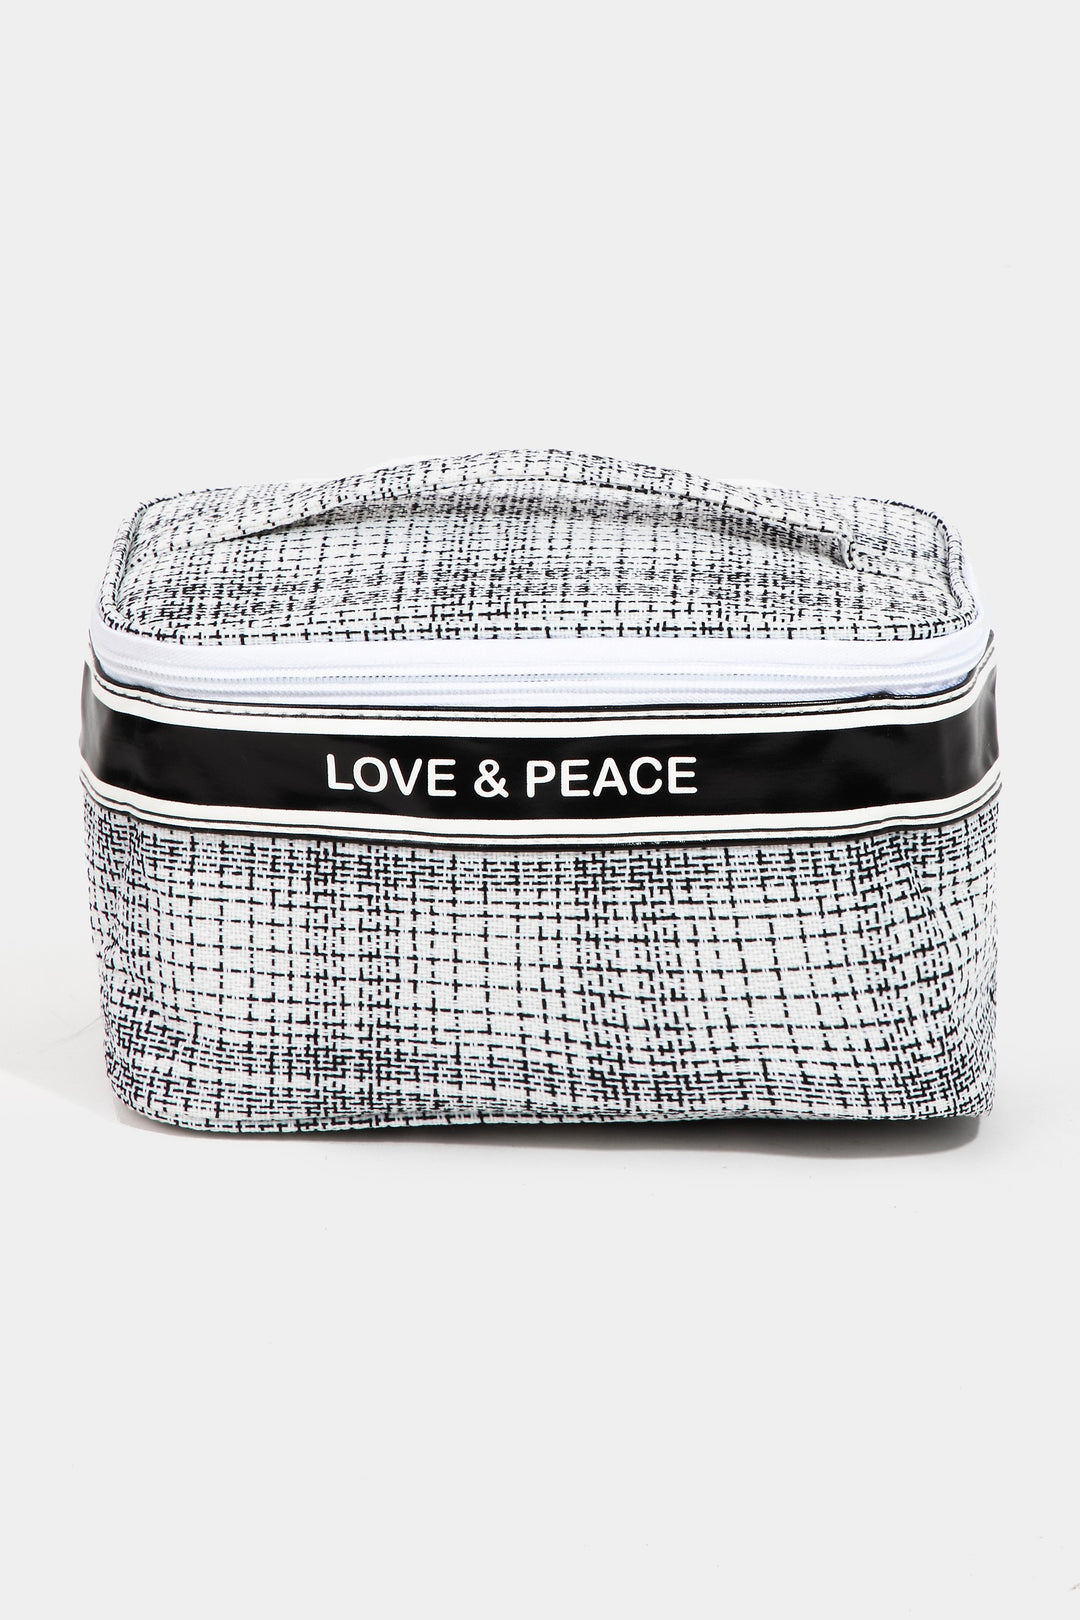 Fame Love & Peace Striped Cosmetic Bag